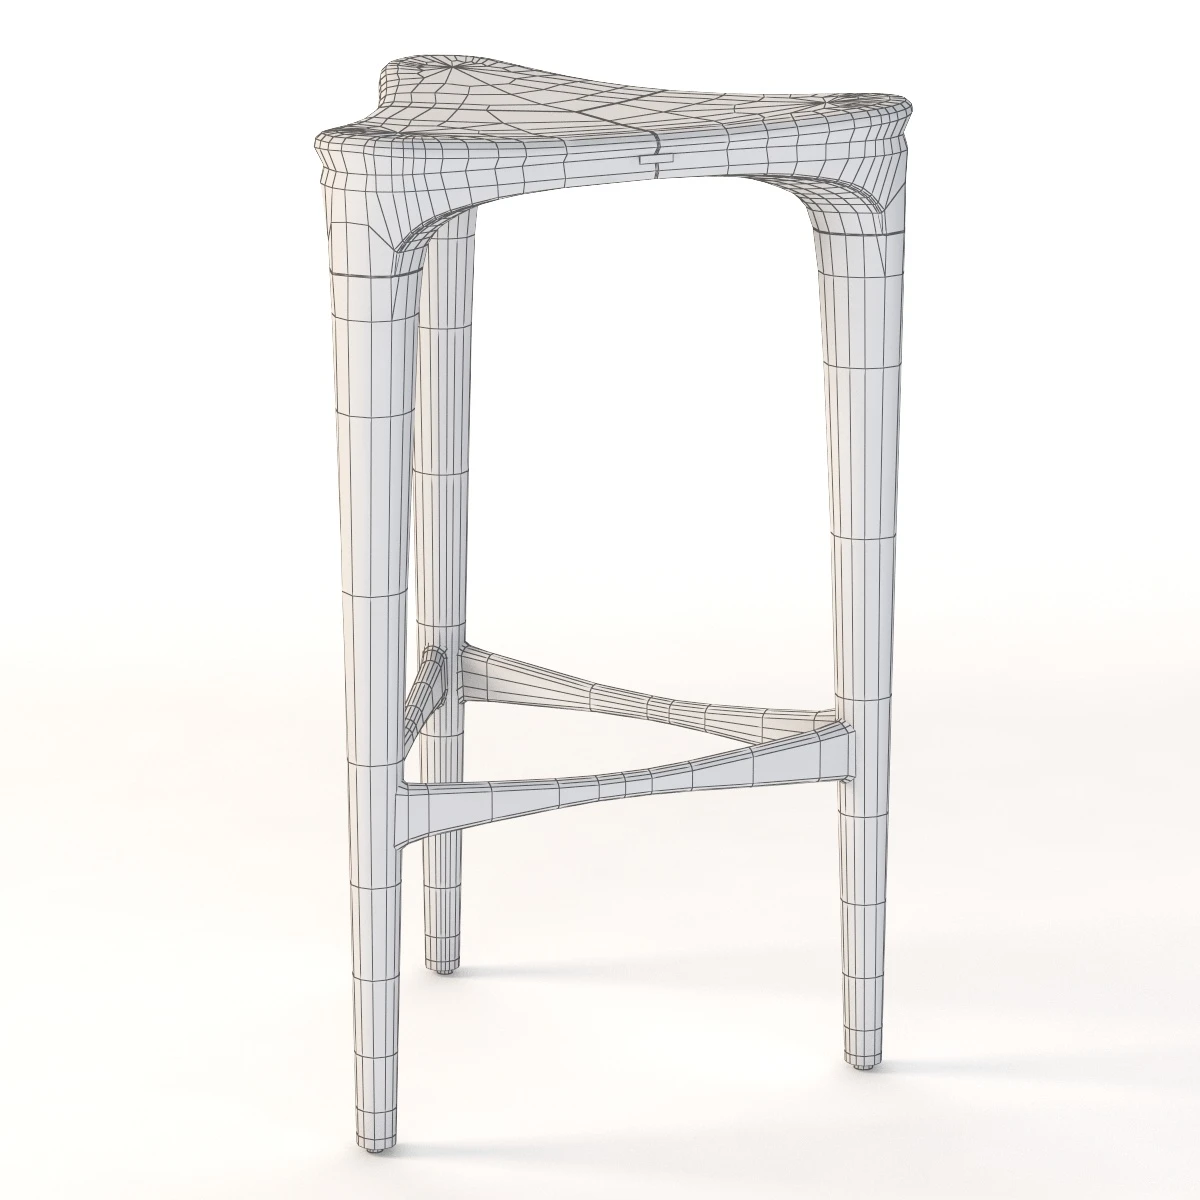 2 By 3 Wood Stools Geiger 3D Model_012